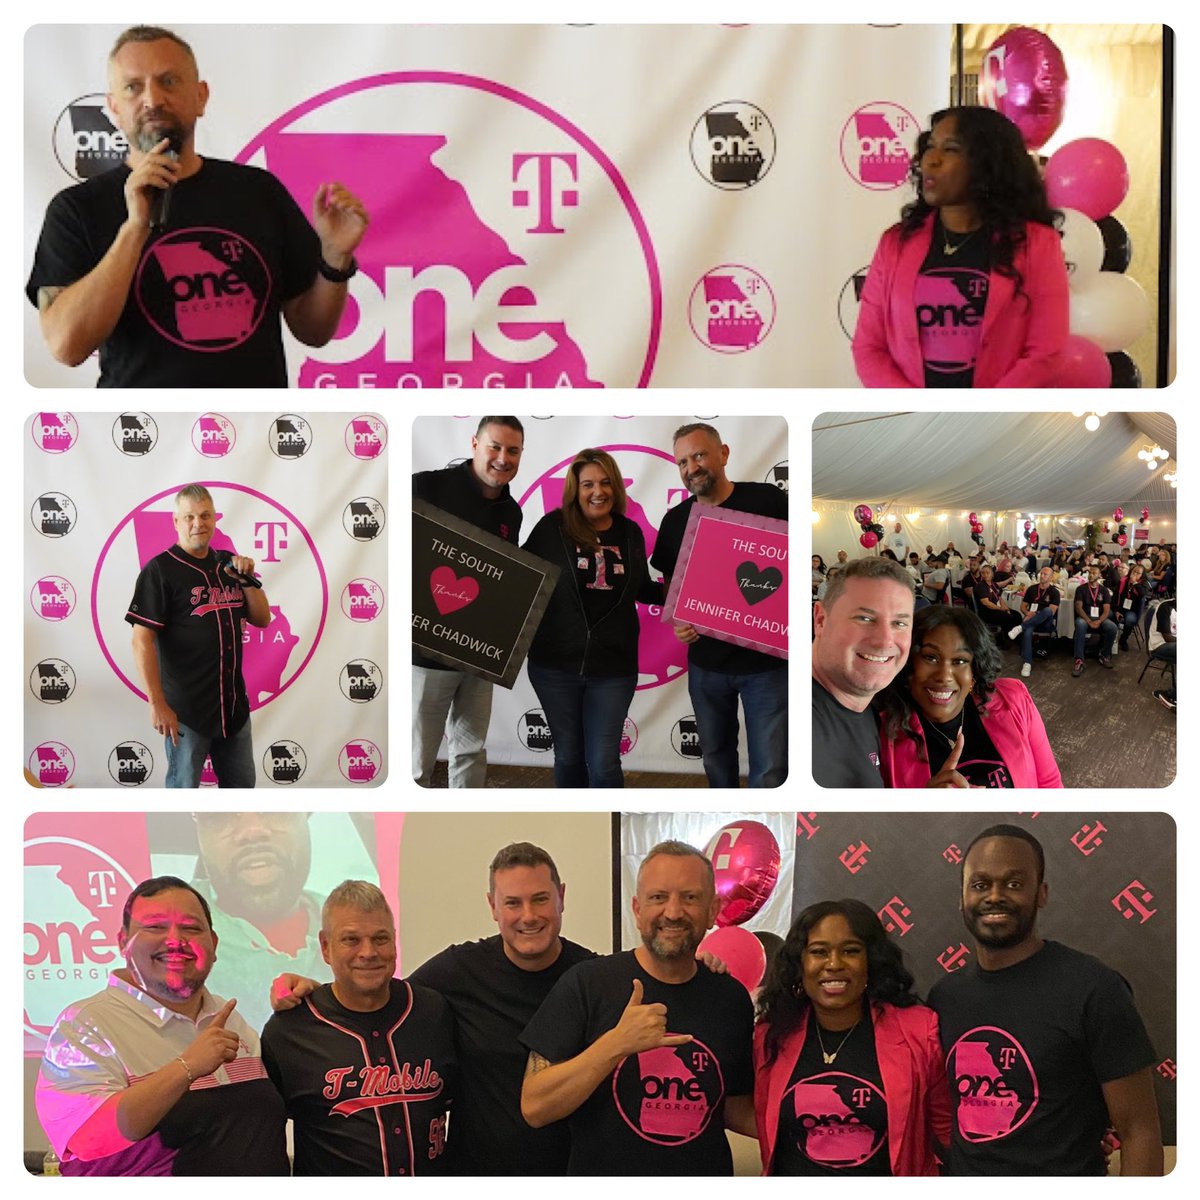 Thanks to @RyanShiell and the #OneGeorgia team for bringing the energy and helping us finish the Total Experience Tour on a high note!600+ leaders and 8 cross functional Total Experience crews all coming together over three weeks to work toward one united mission! #BestInTheWorld